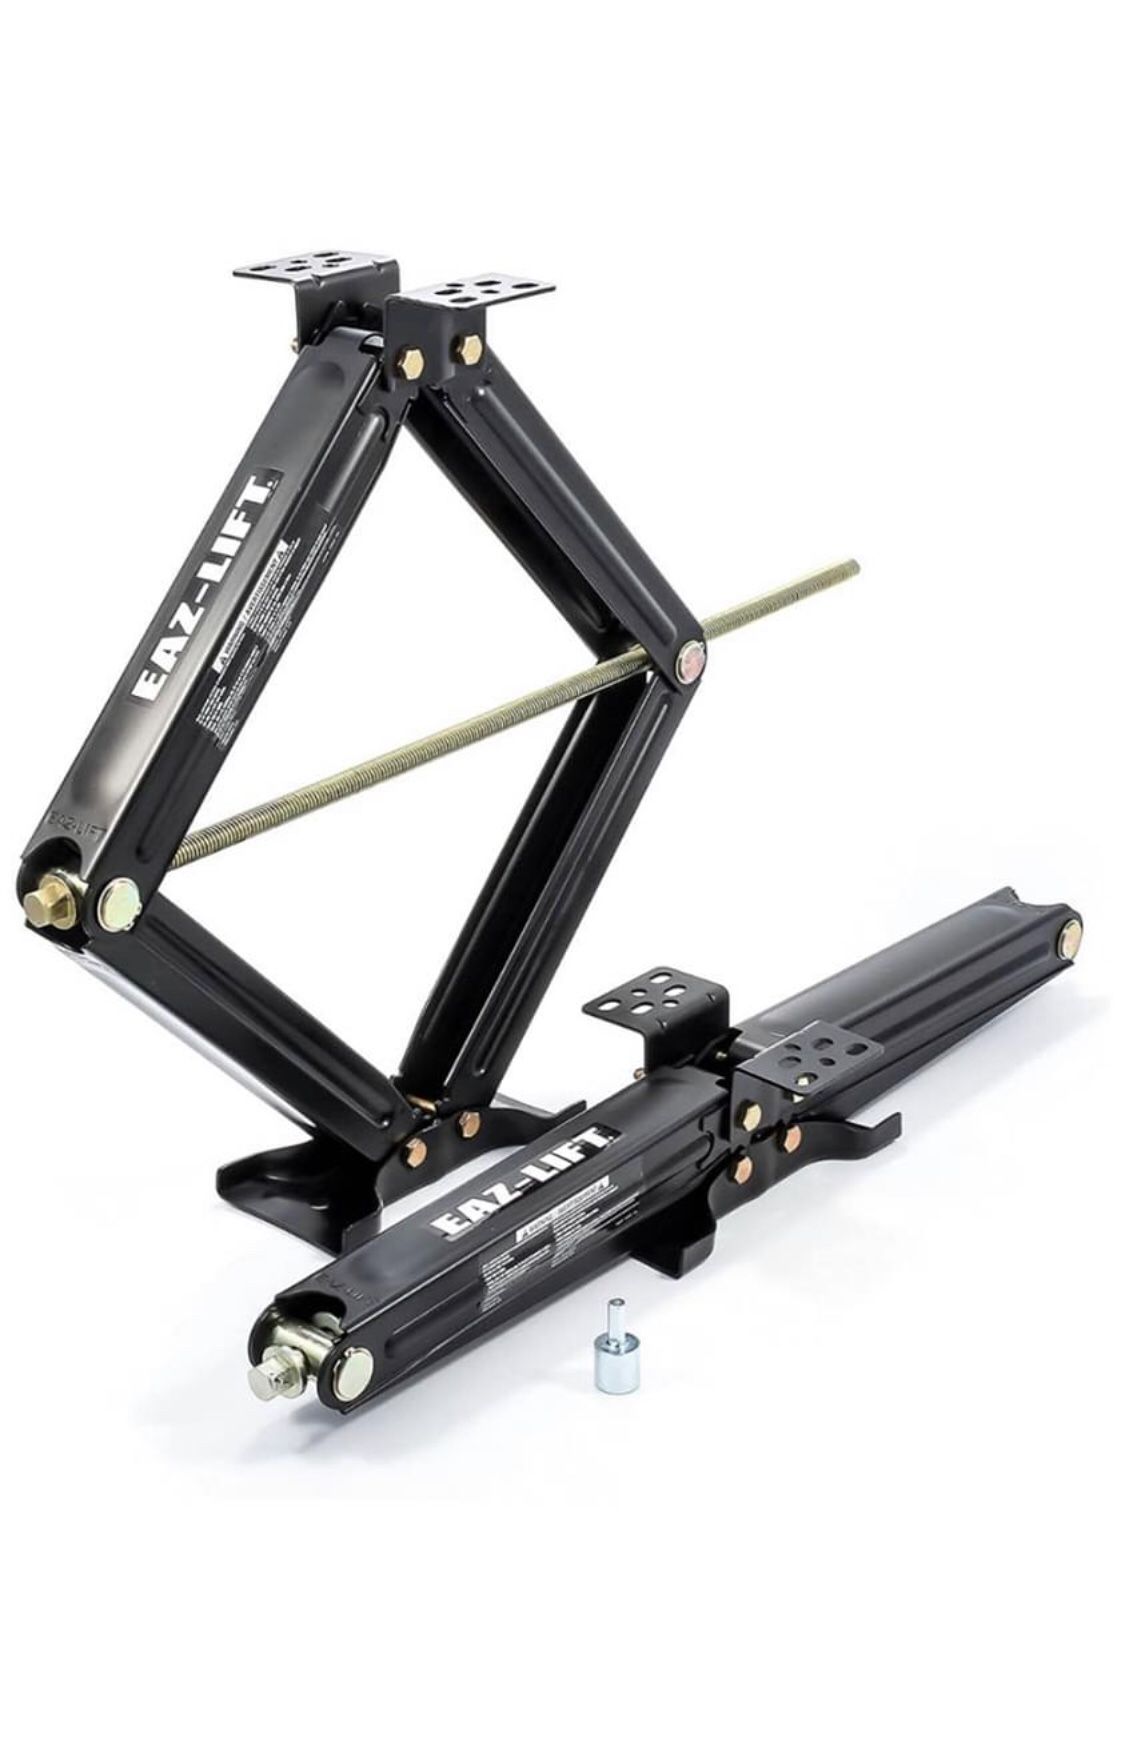 Eaz-Lift 30" RV Stabilizing Scissor Jack, Fits Pop-Up Campers and Travel Trailers 5000 lbs rated.